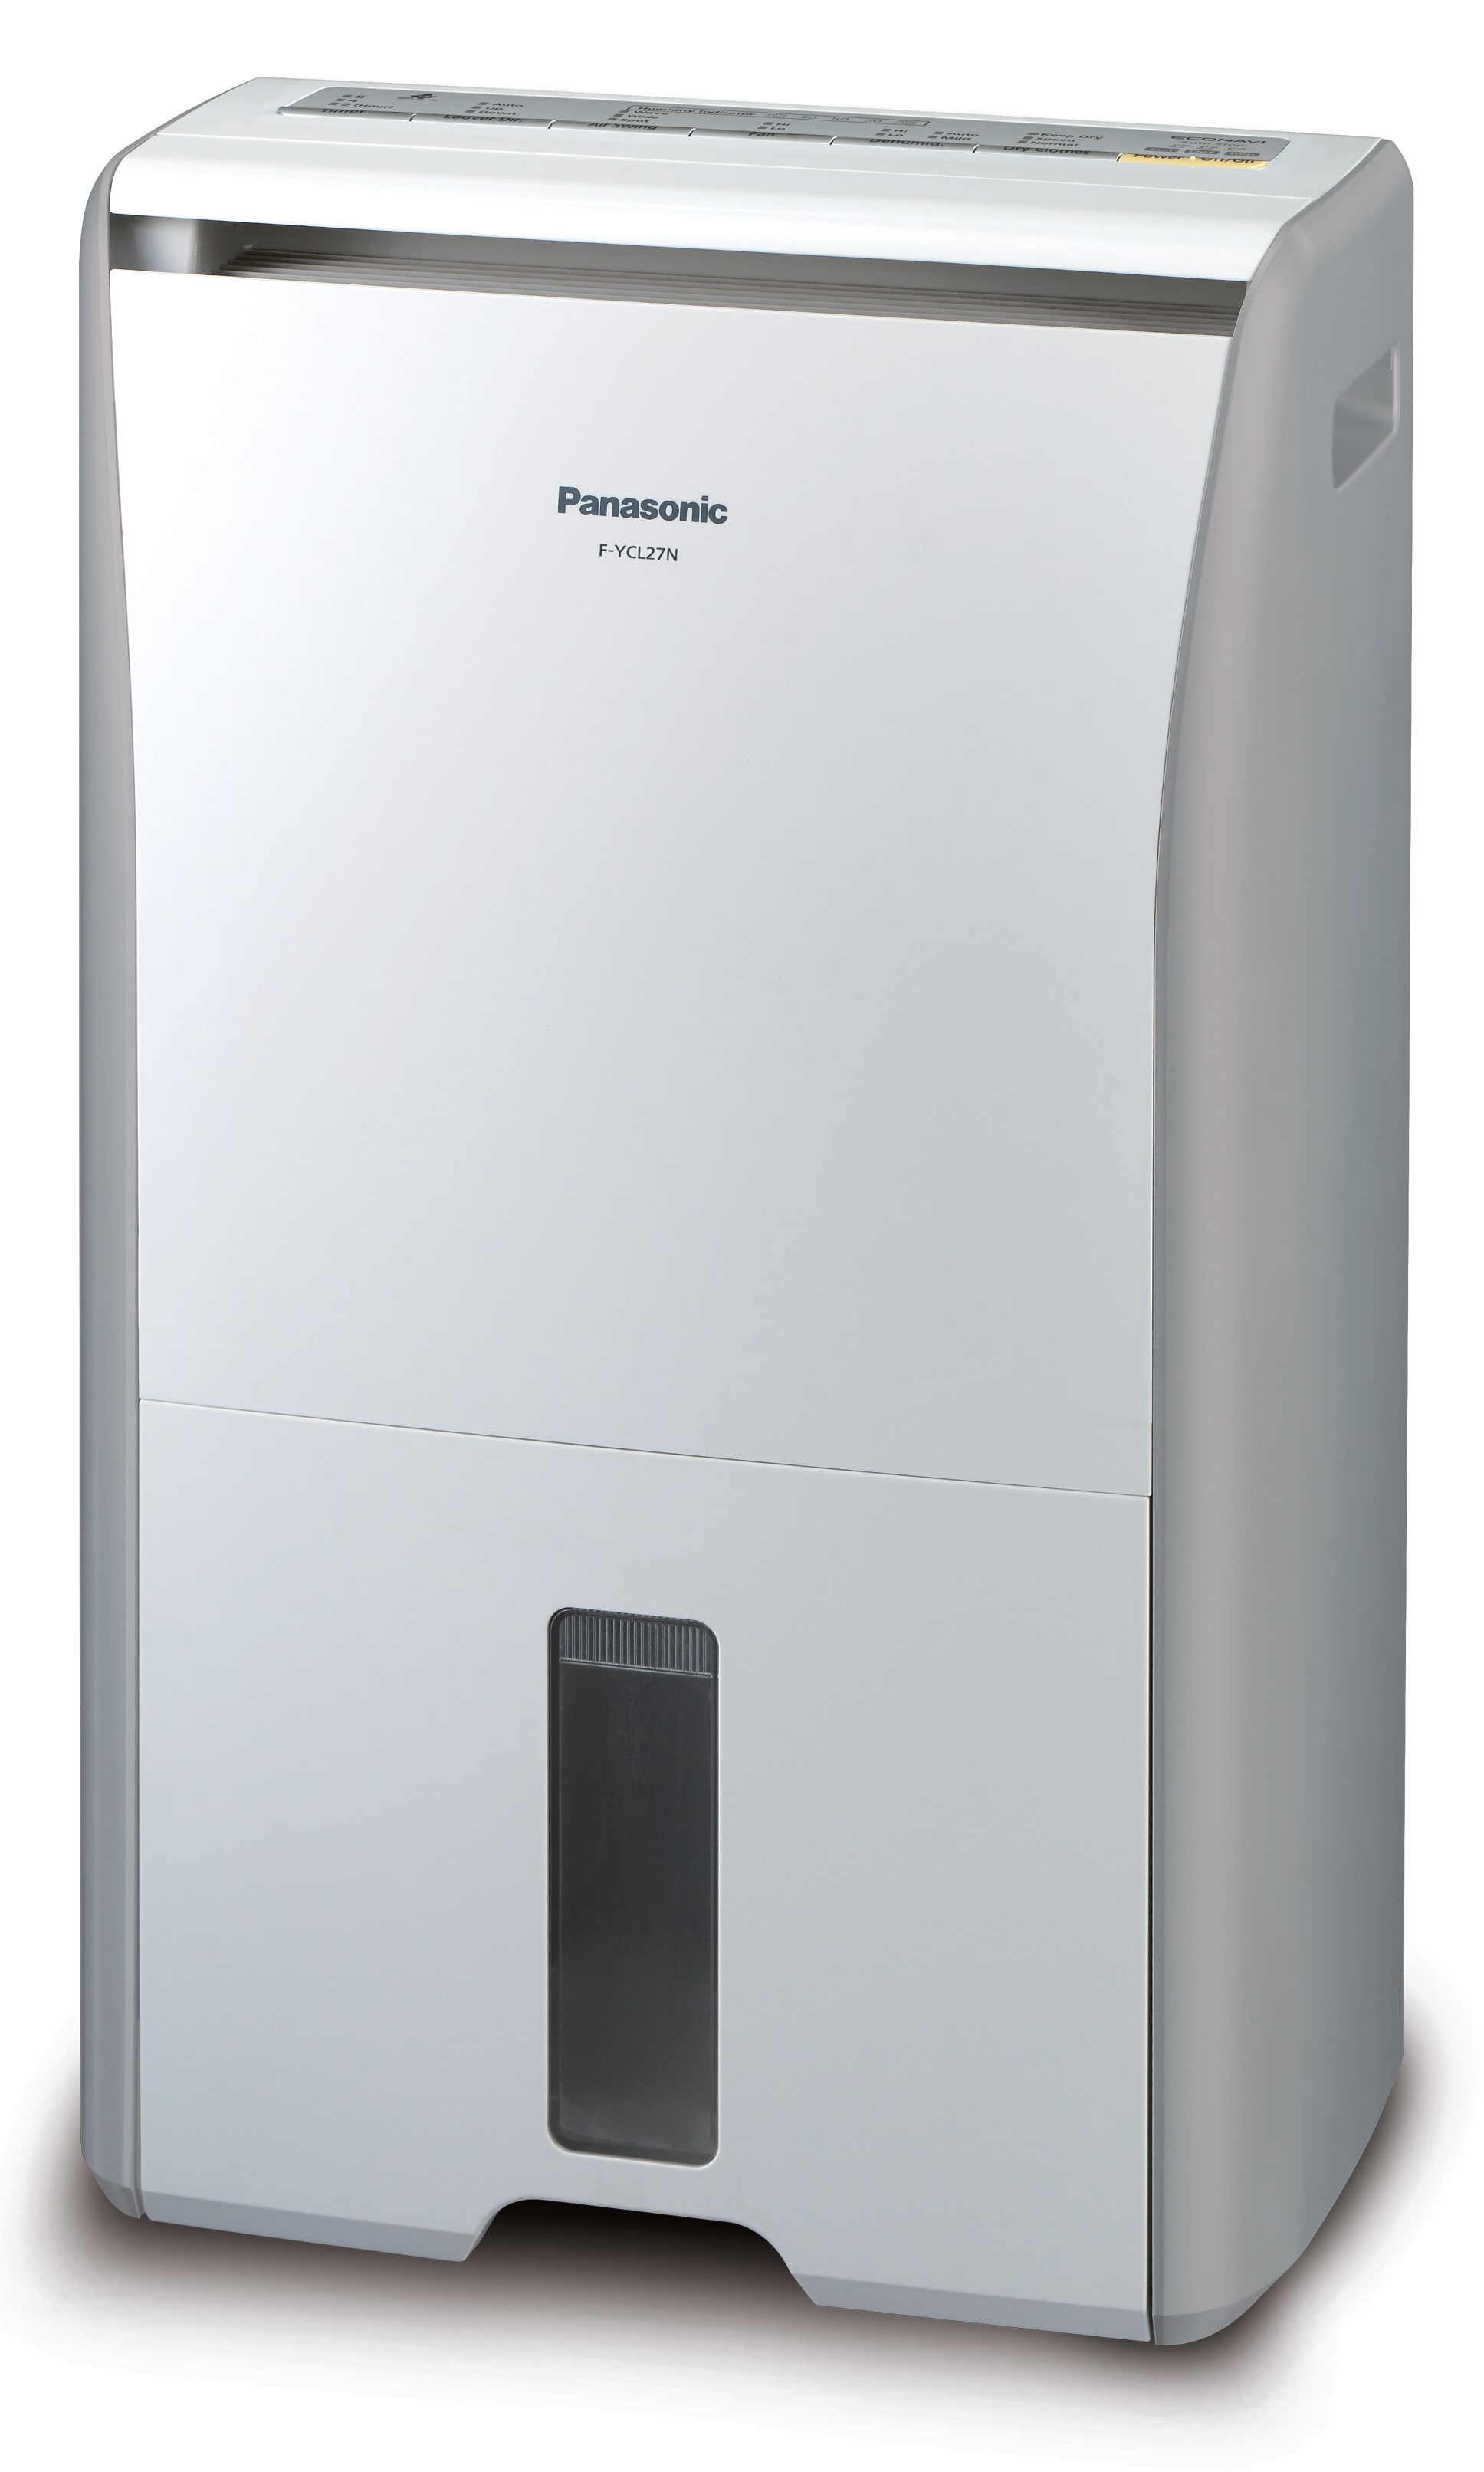 Panasonic FYCL27N 27L Dehumidifier - Magness Benrow